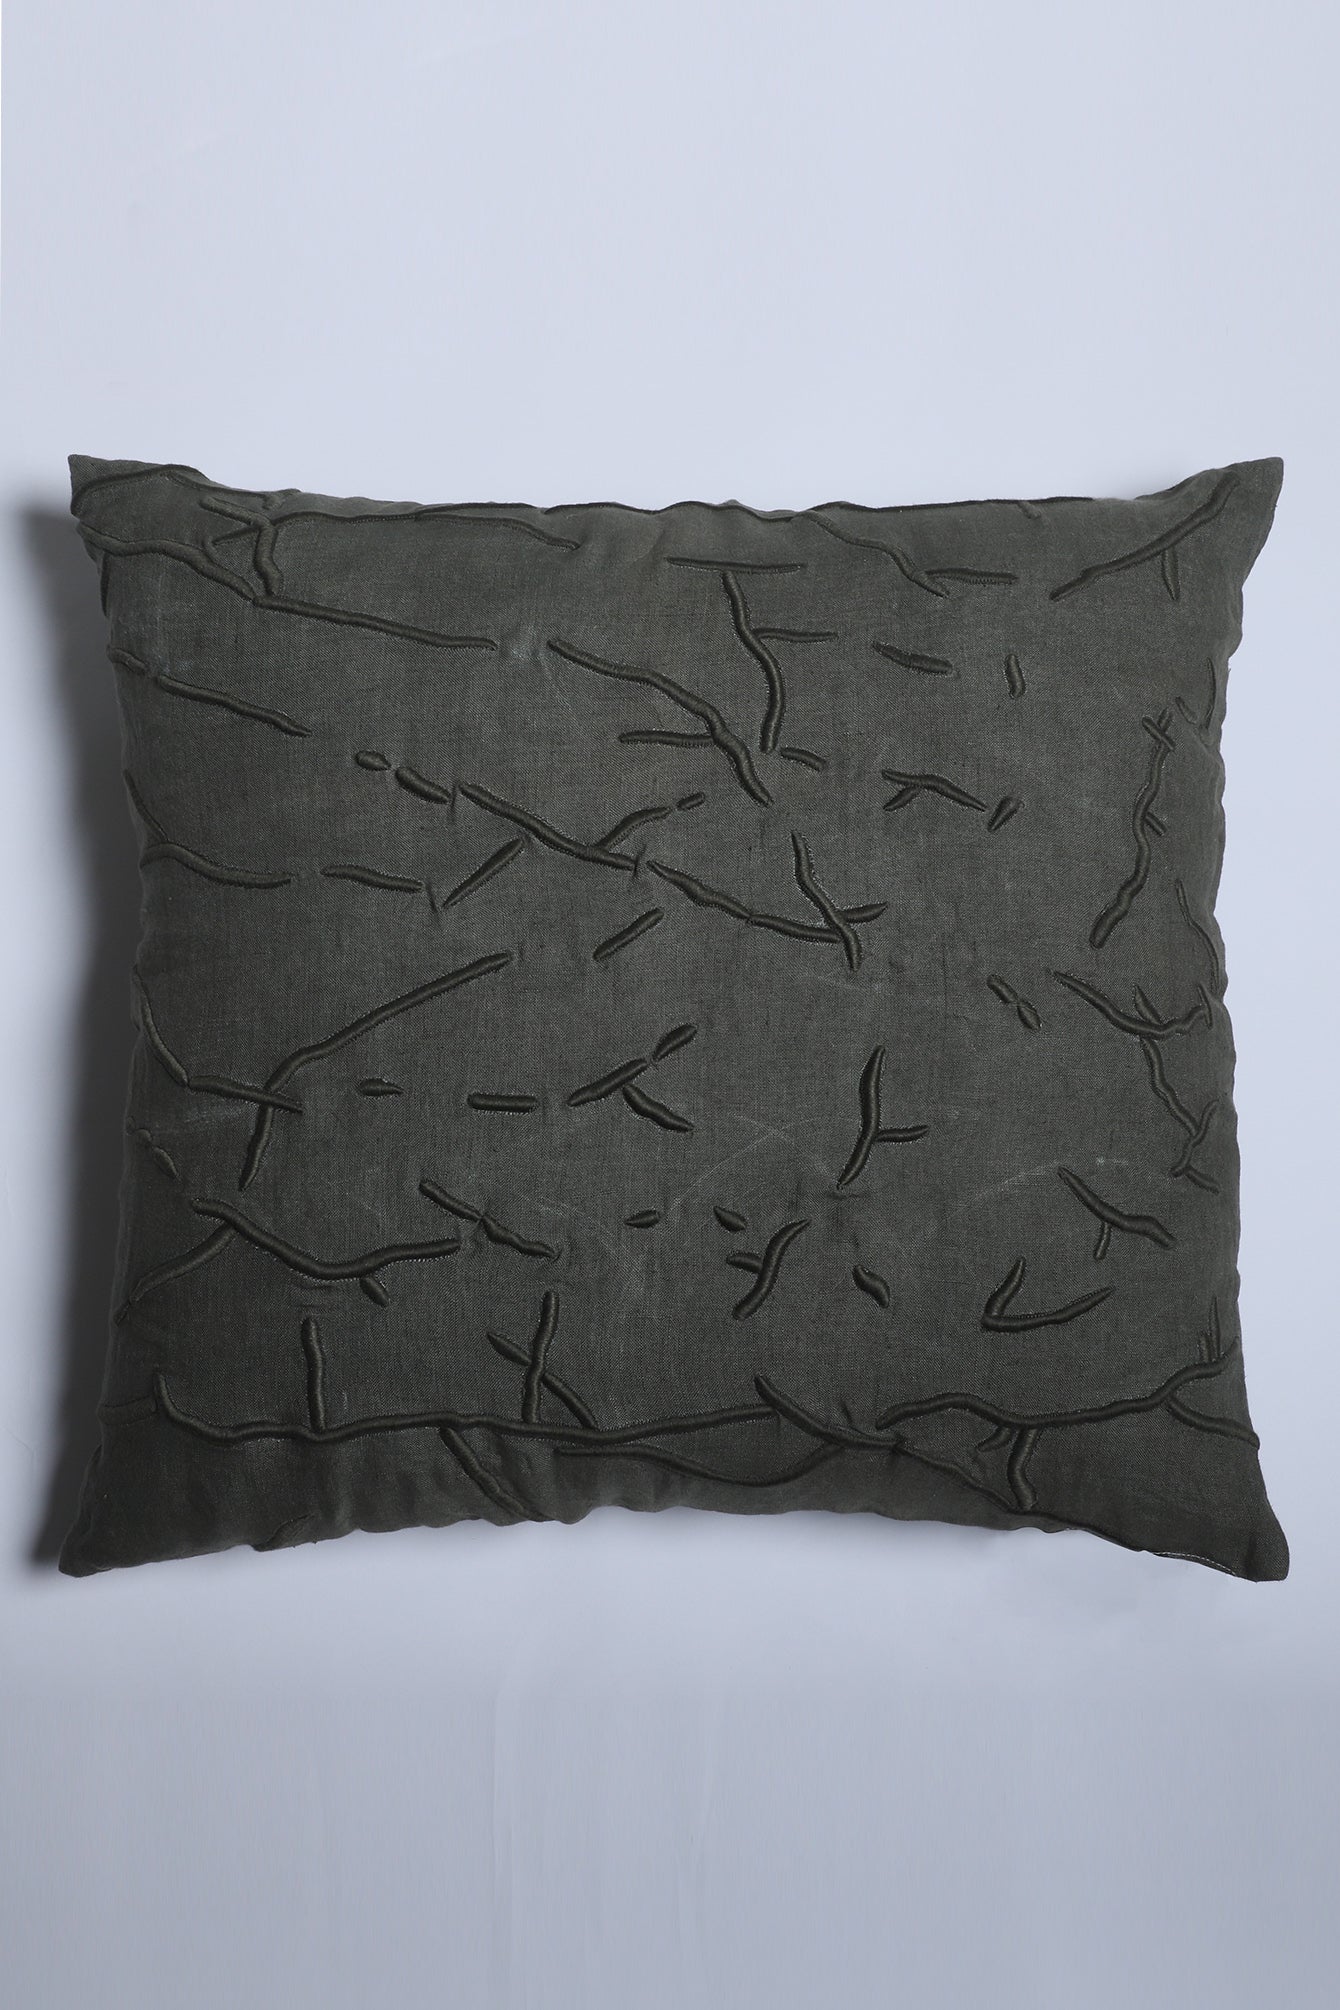 Bregovo Embroidered Cushion Cover